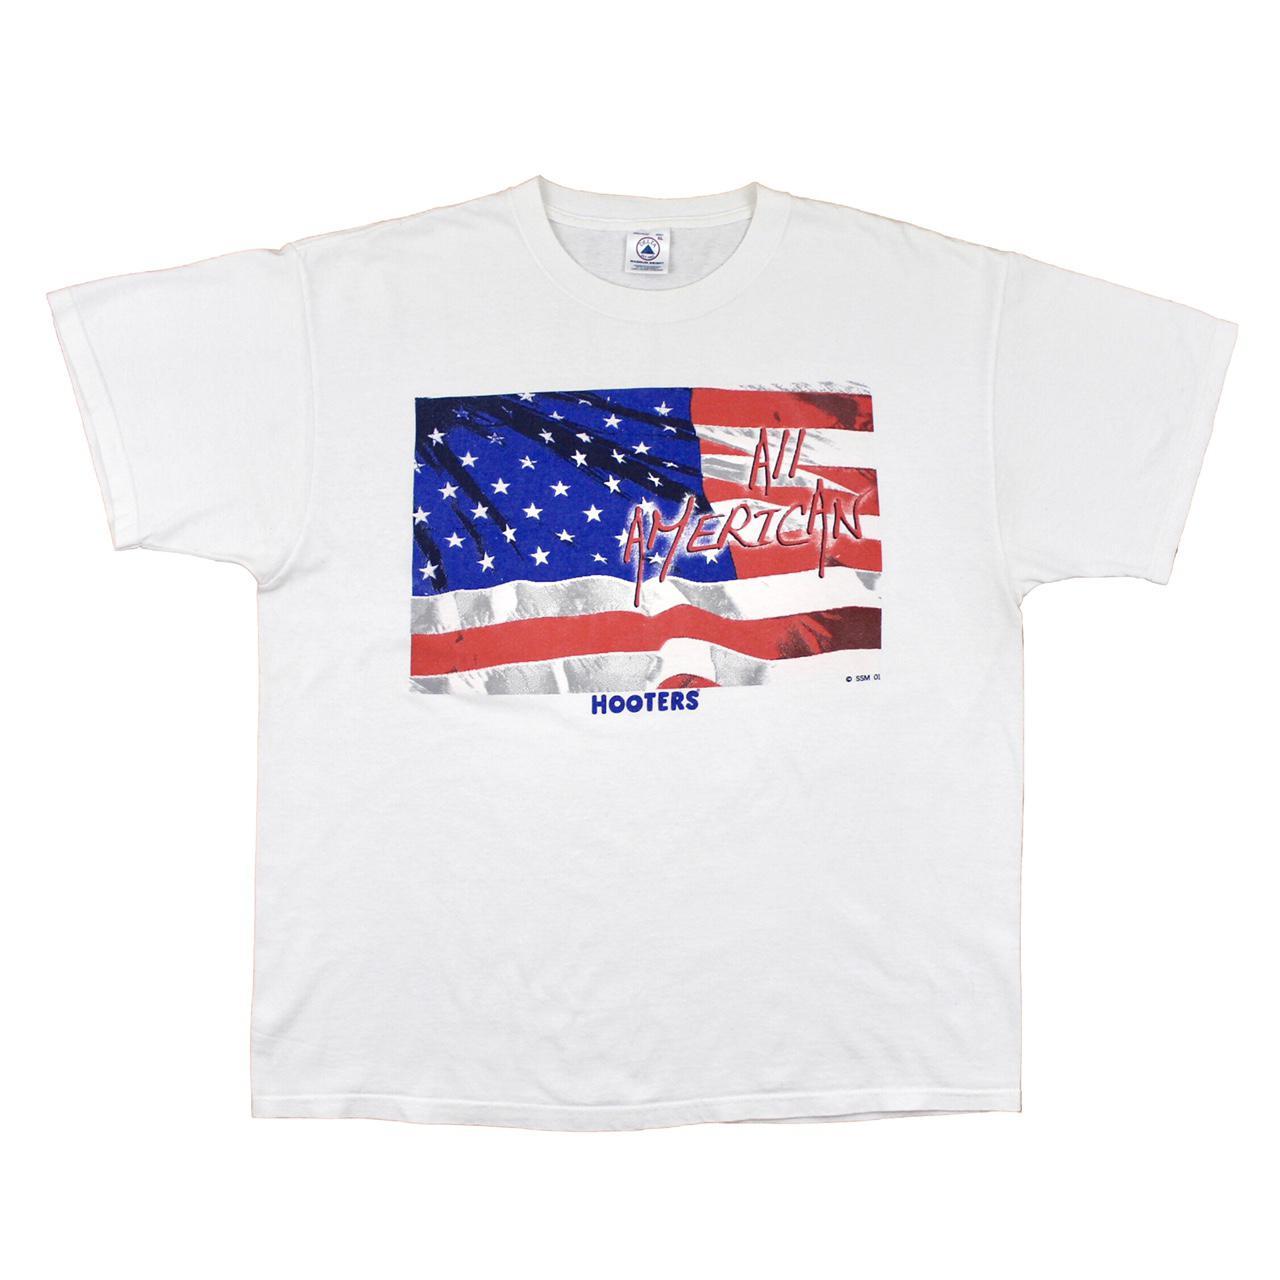 Product Image 1 - 2001 Hooters All American T-Shirt